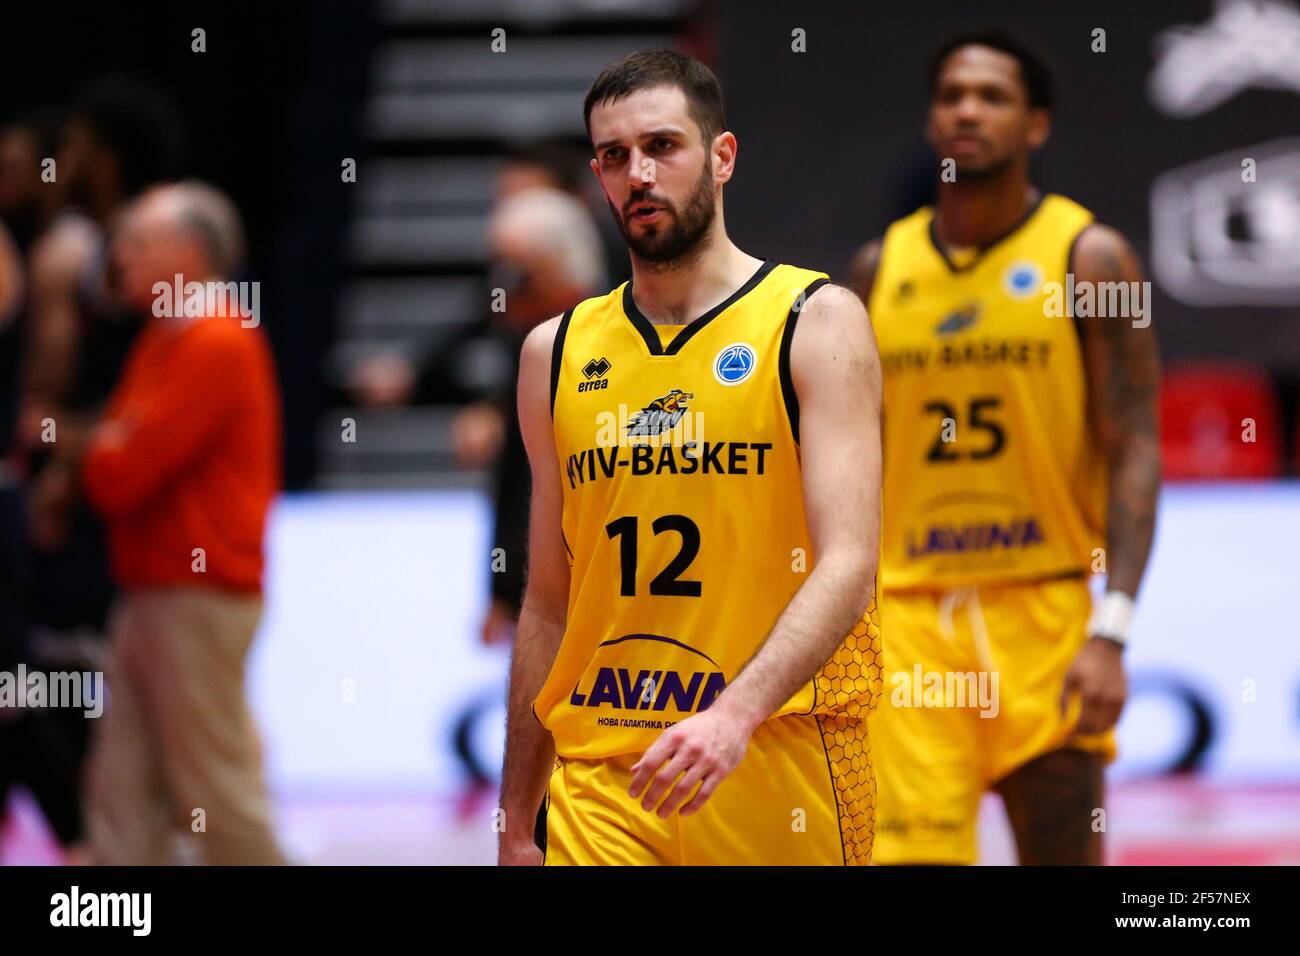 DEN BOSCH, NETHERLANDS - MARCH 24: Pavlo Krutous of BC Kyiv Basket looks dejected during the Fiba Europe Cup game between Ironi Ness Ziona and BC Kyiv Basket at Maaspoort on March 24, 2021 in Den Bosch, Netherlands (Photo by Rene Nijhuis/Orange Pictures)*** Local Caption *** Pavlo Krutous Stock Photo